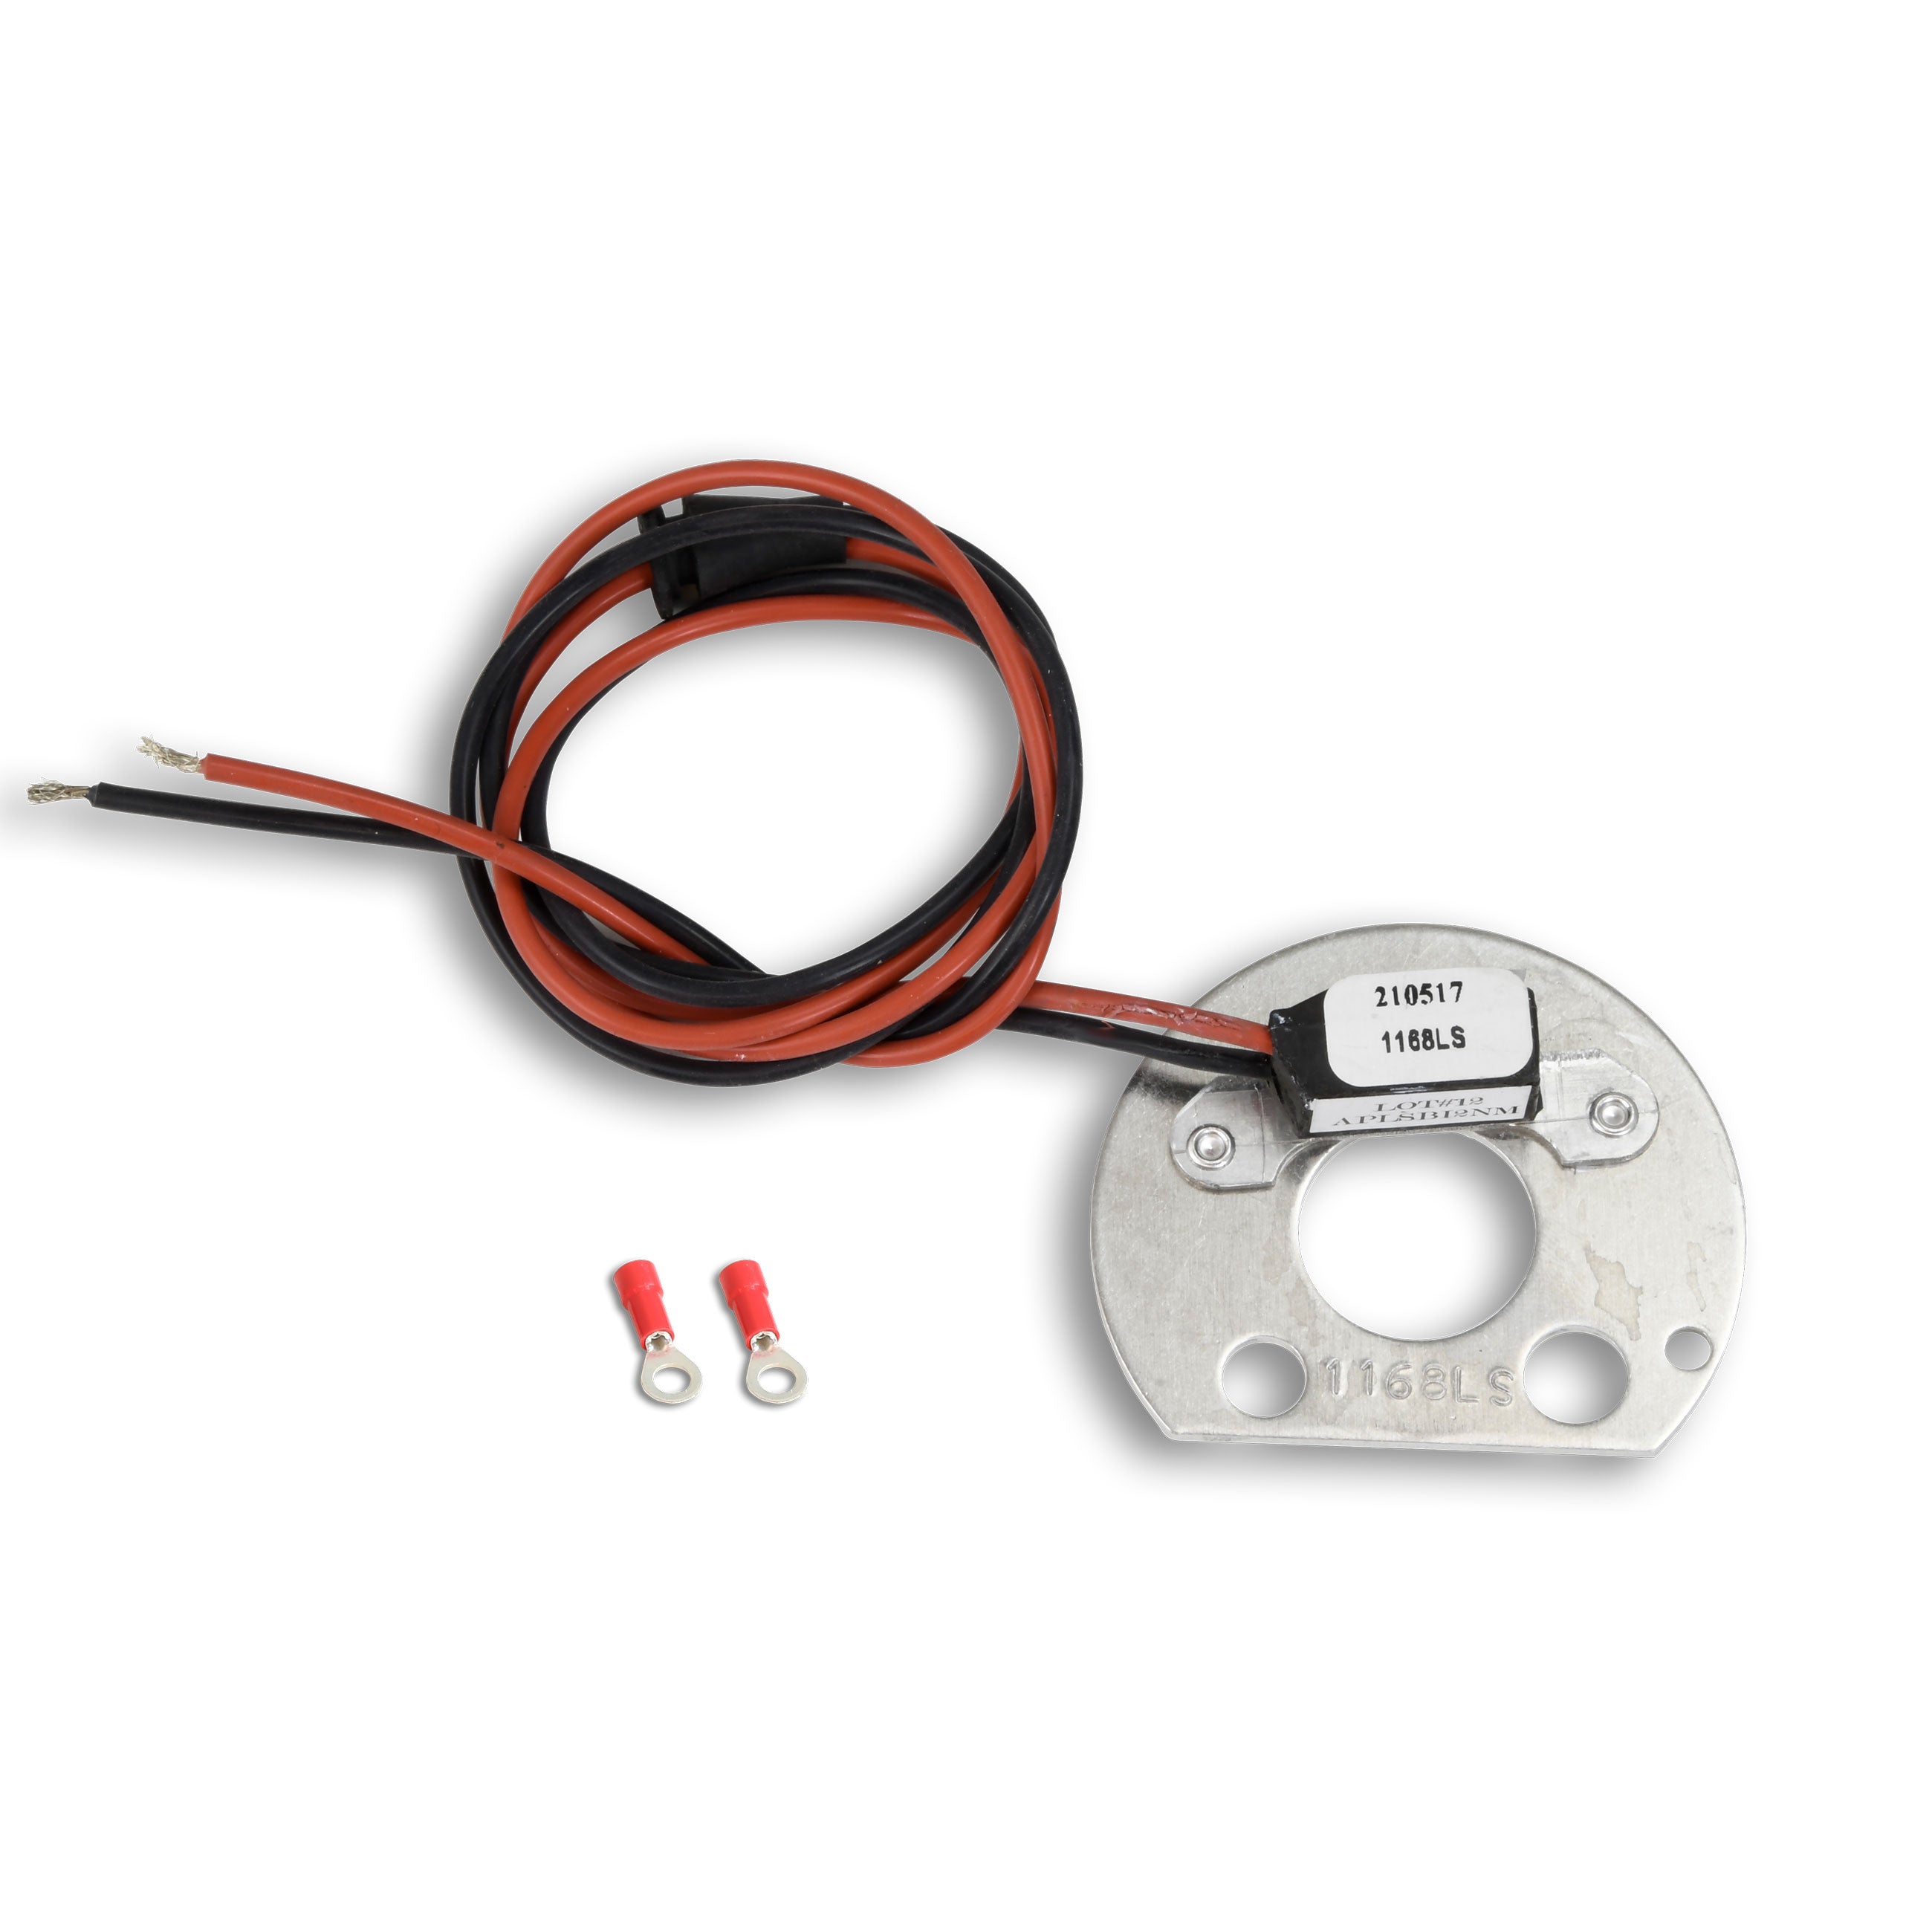 PerTronix 1168LS Ignitor® Delco 6 cyl Electronic Ignition Conversion Kit